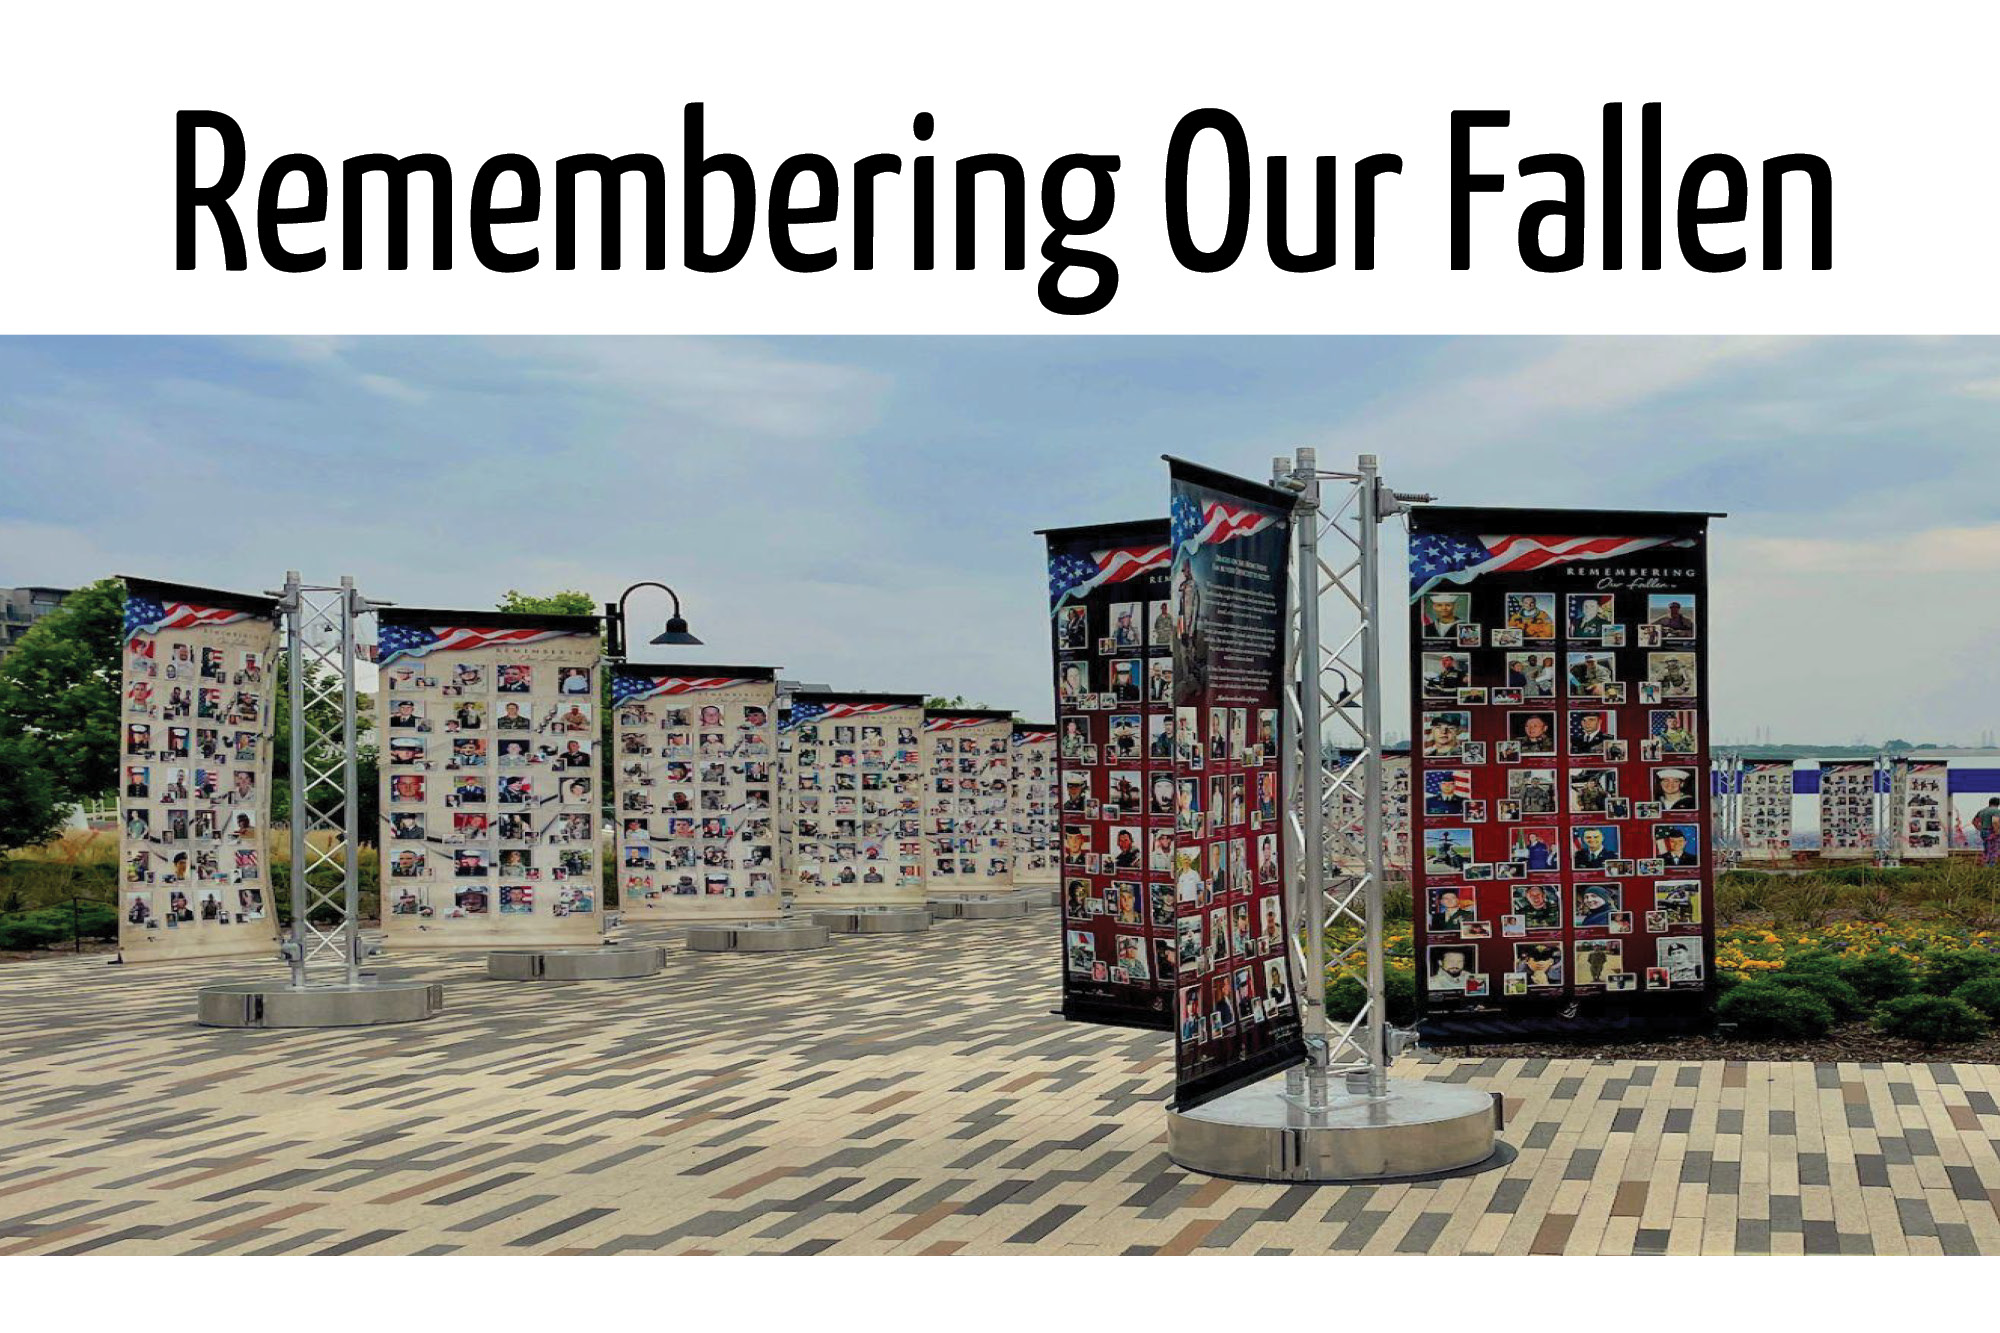 Image for "Remembering Our Fallen" press release.